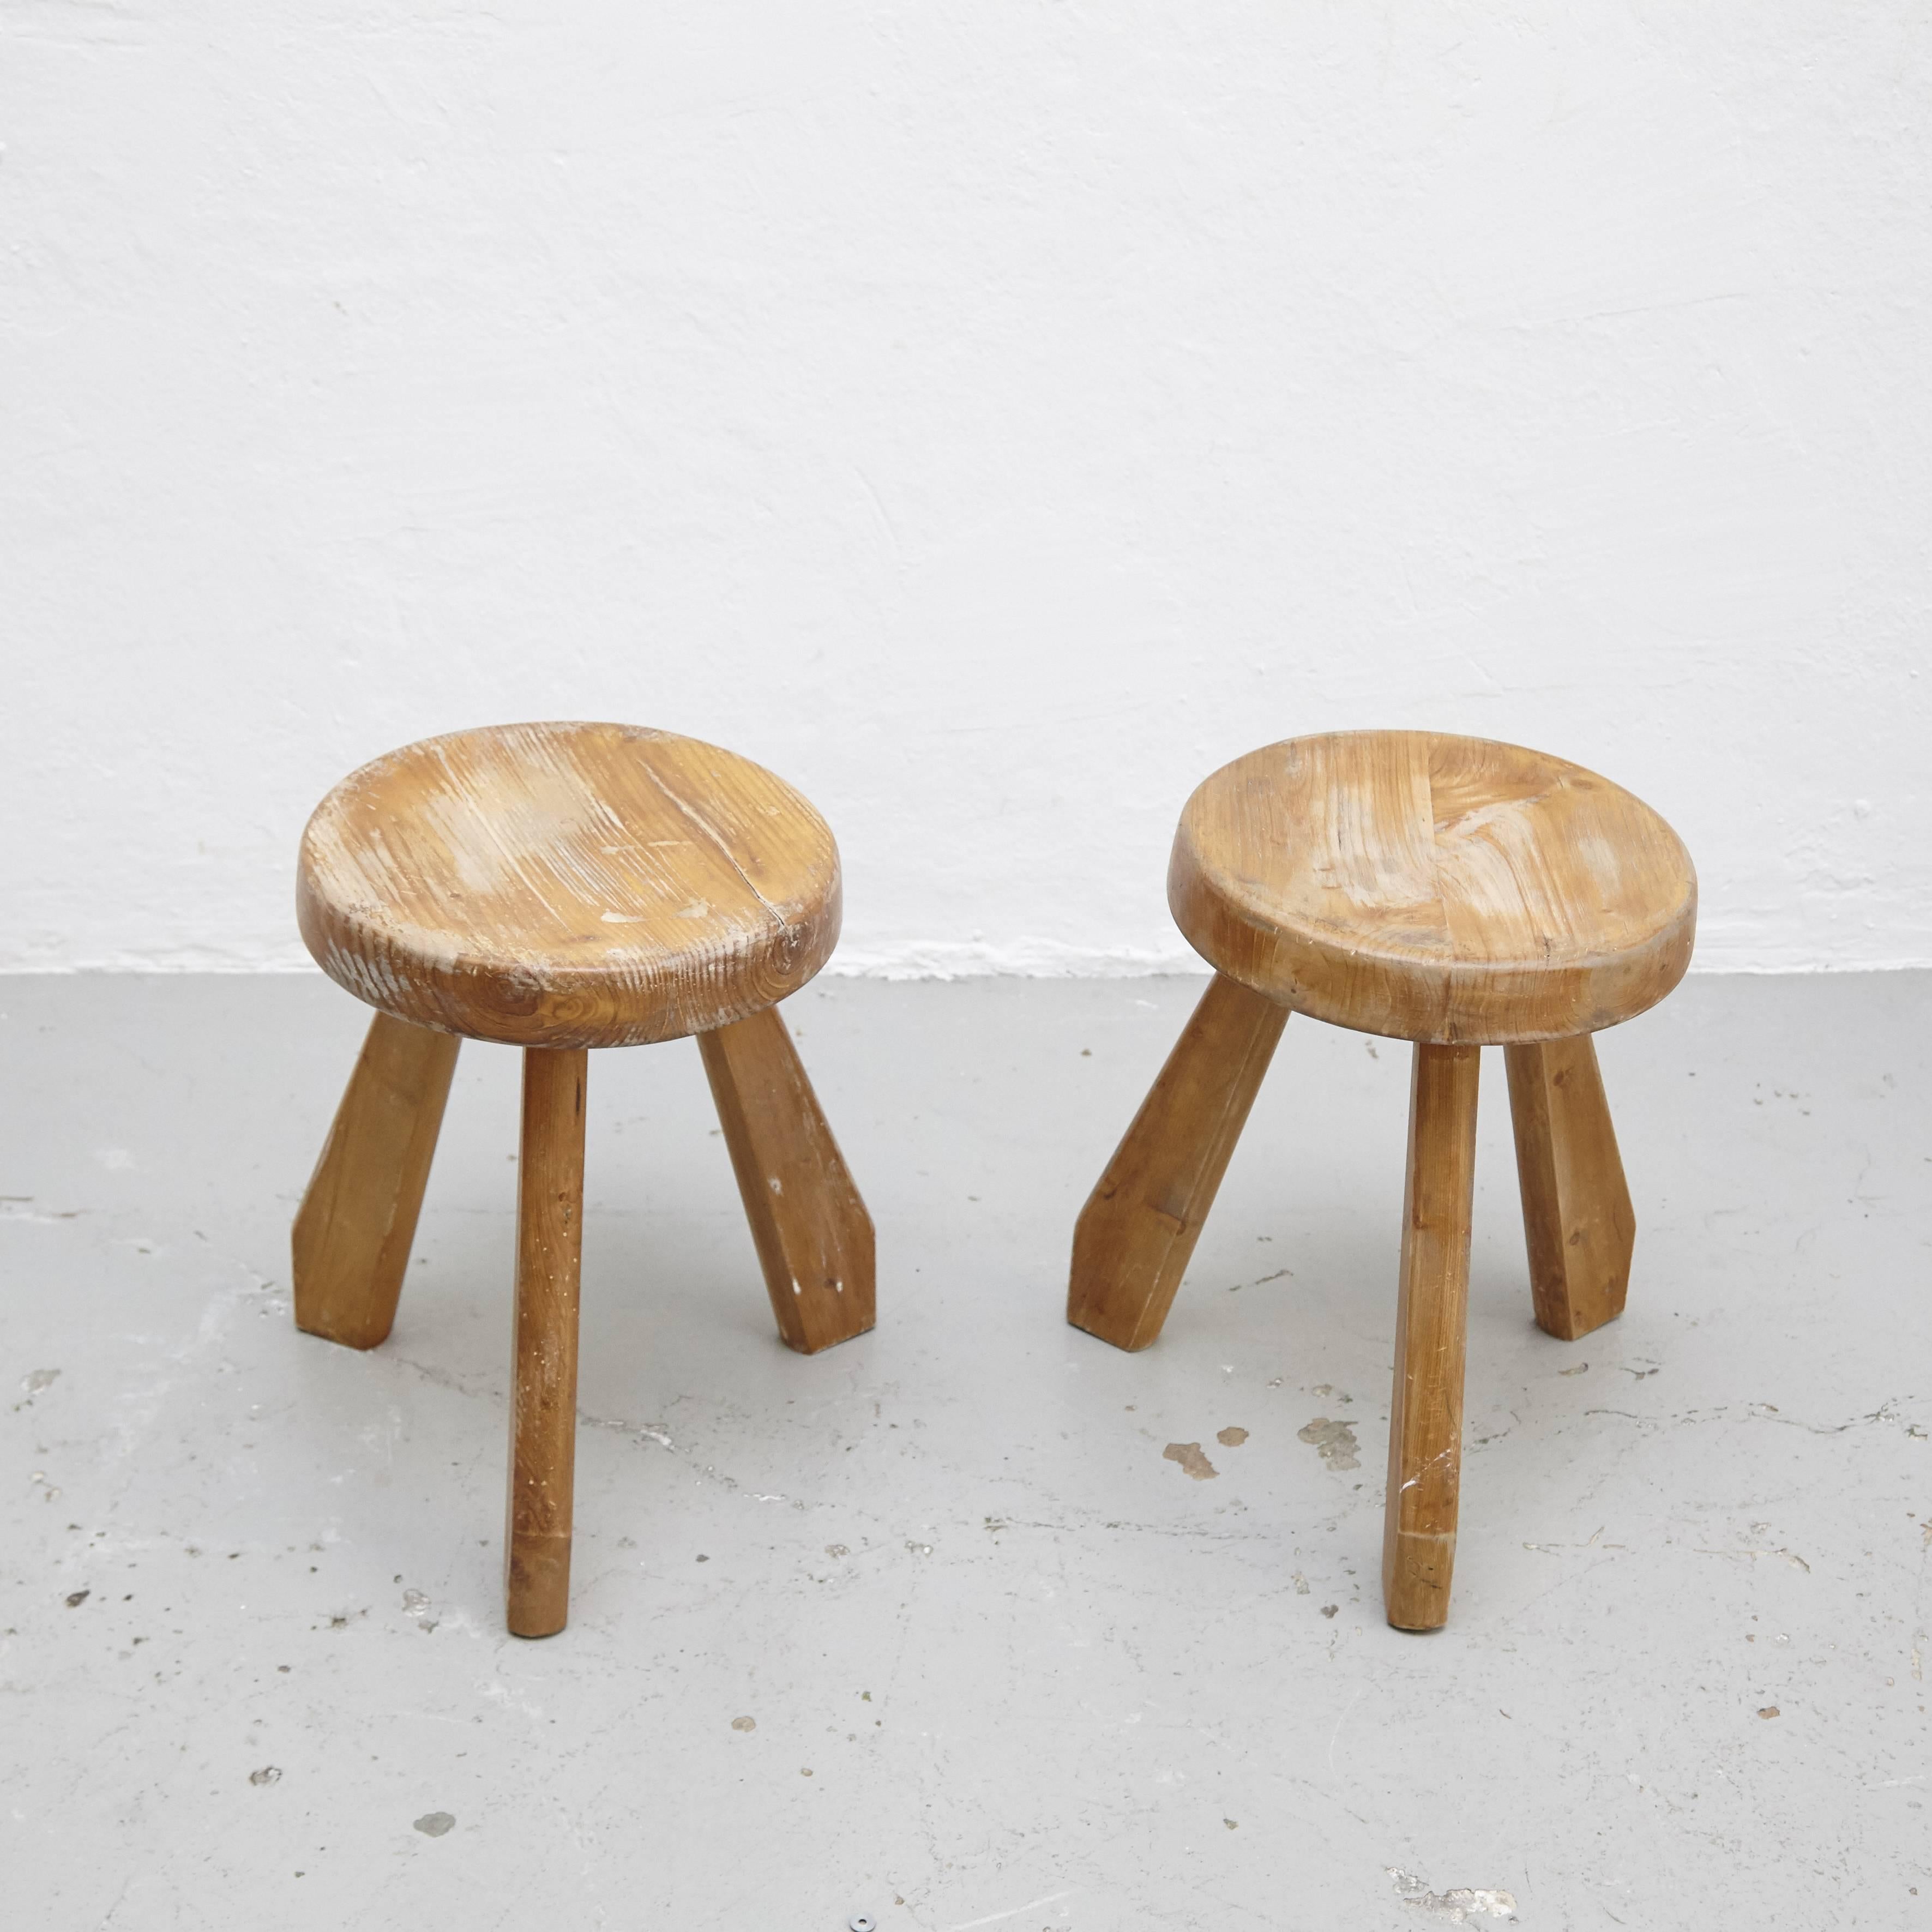 Stools, model Sandoz, designed by Charlotte Perriand, circa 1960.
Manufactured in France.
Pinewood.

In good original condition, with minor wear consistent with age and use, preserving a beautiful patina.

Charlotte Perriand (1903-1999). She